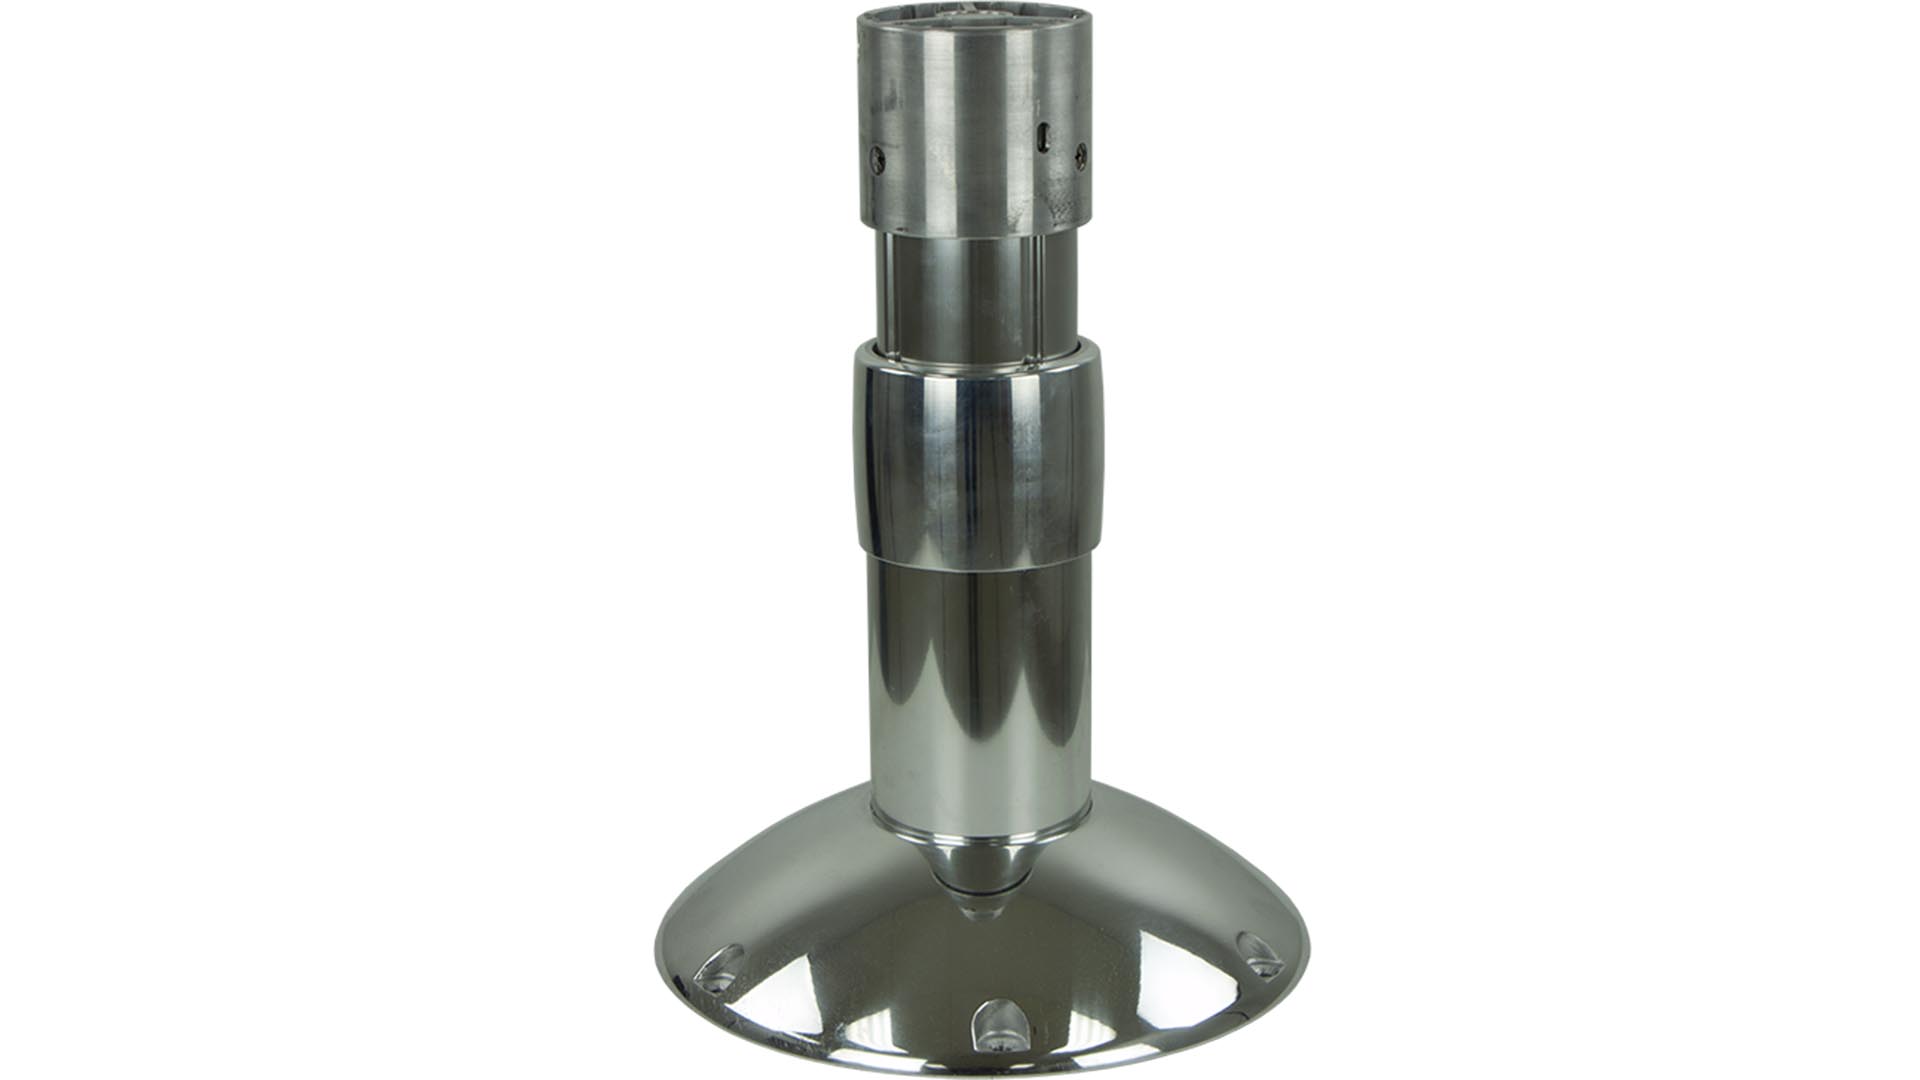 Springfield 1561107 Adjustable Economy Pedestal - 12 to 18 Height :  : Sports & Outdoors